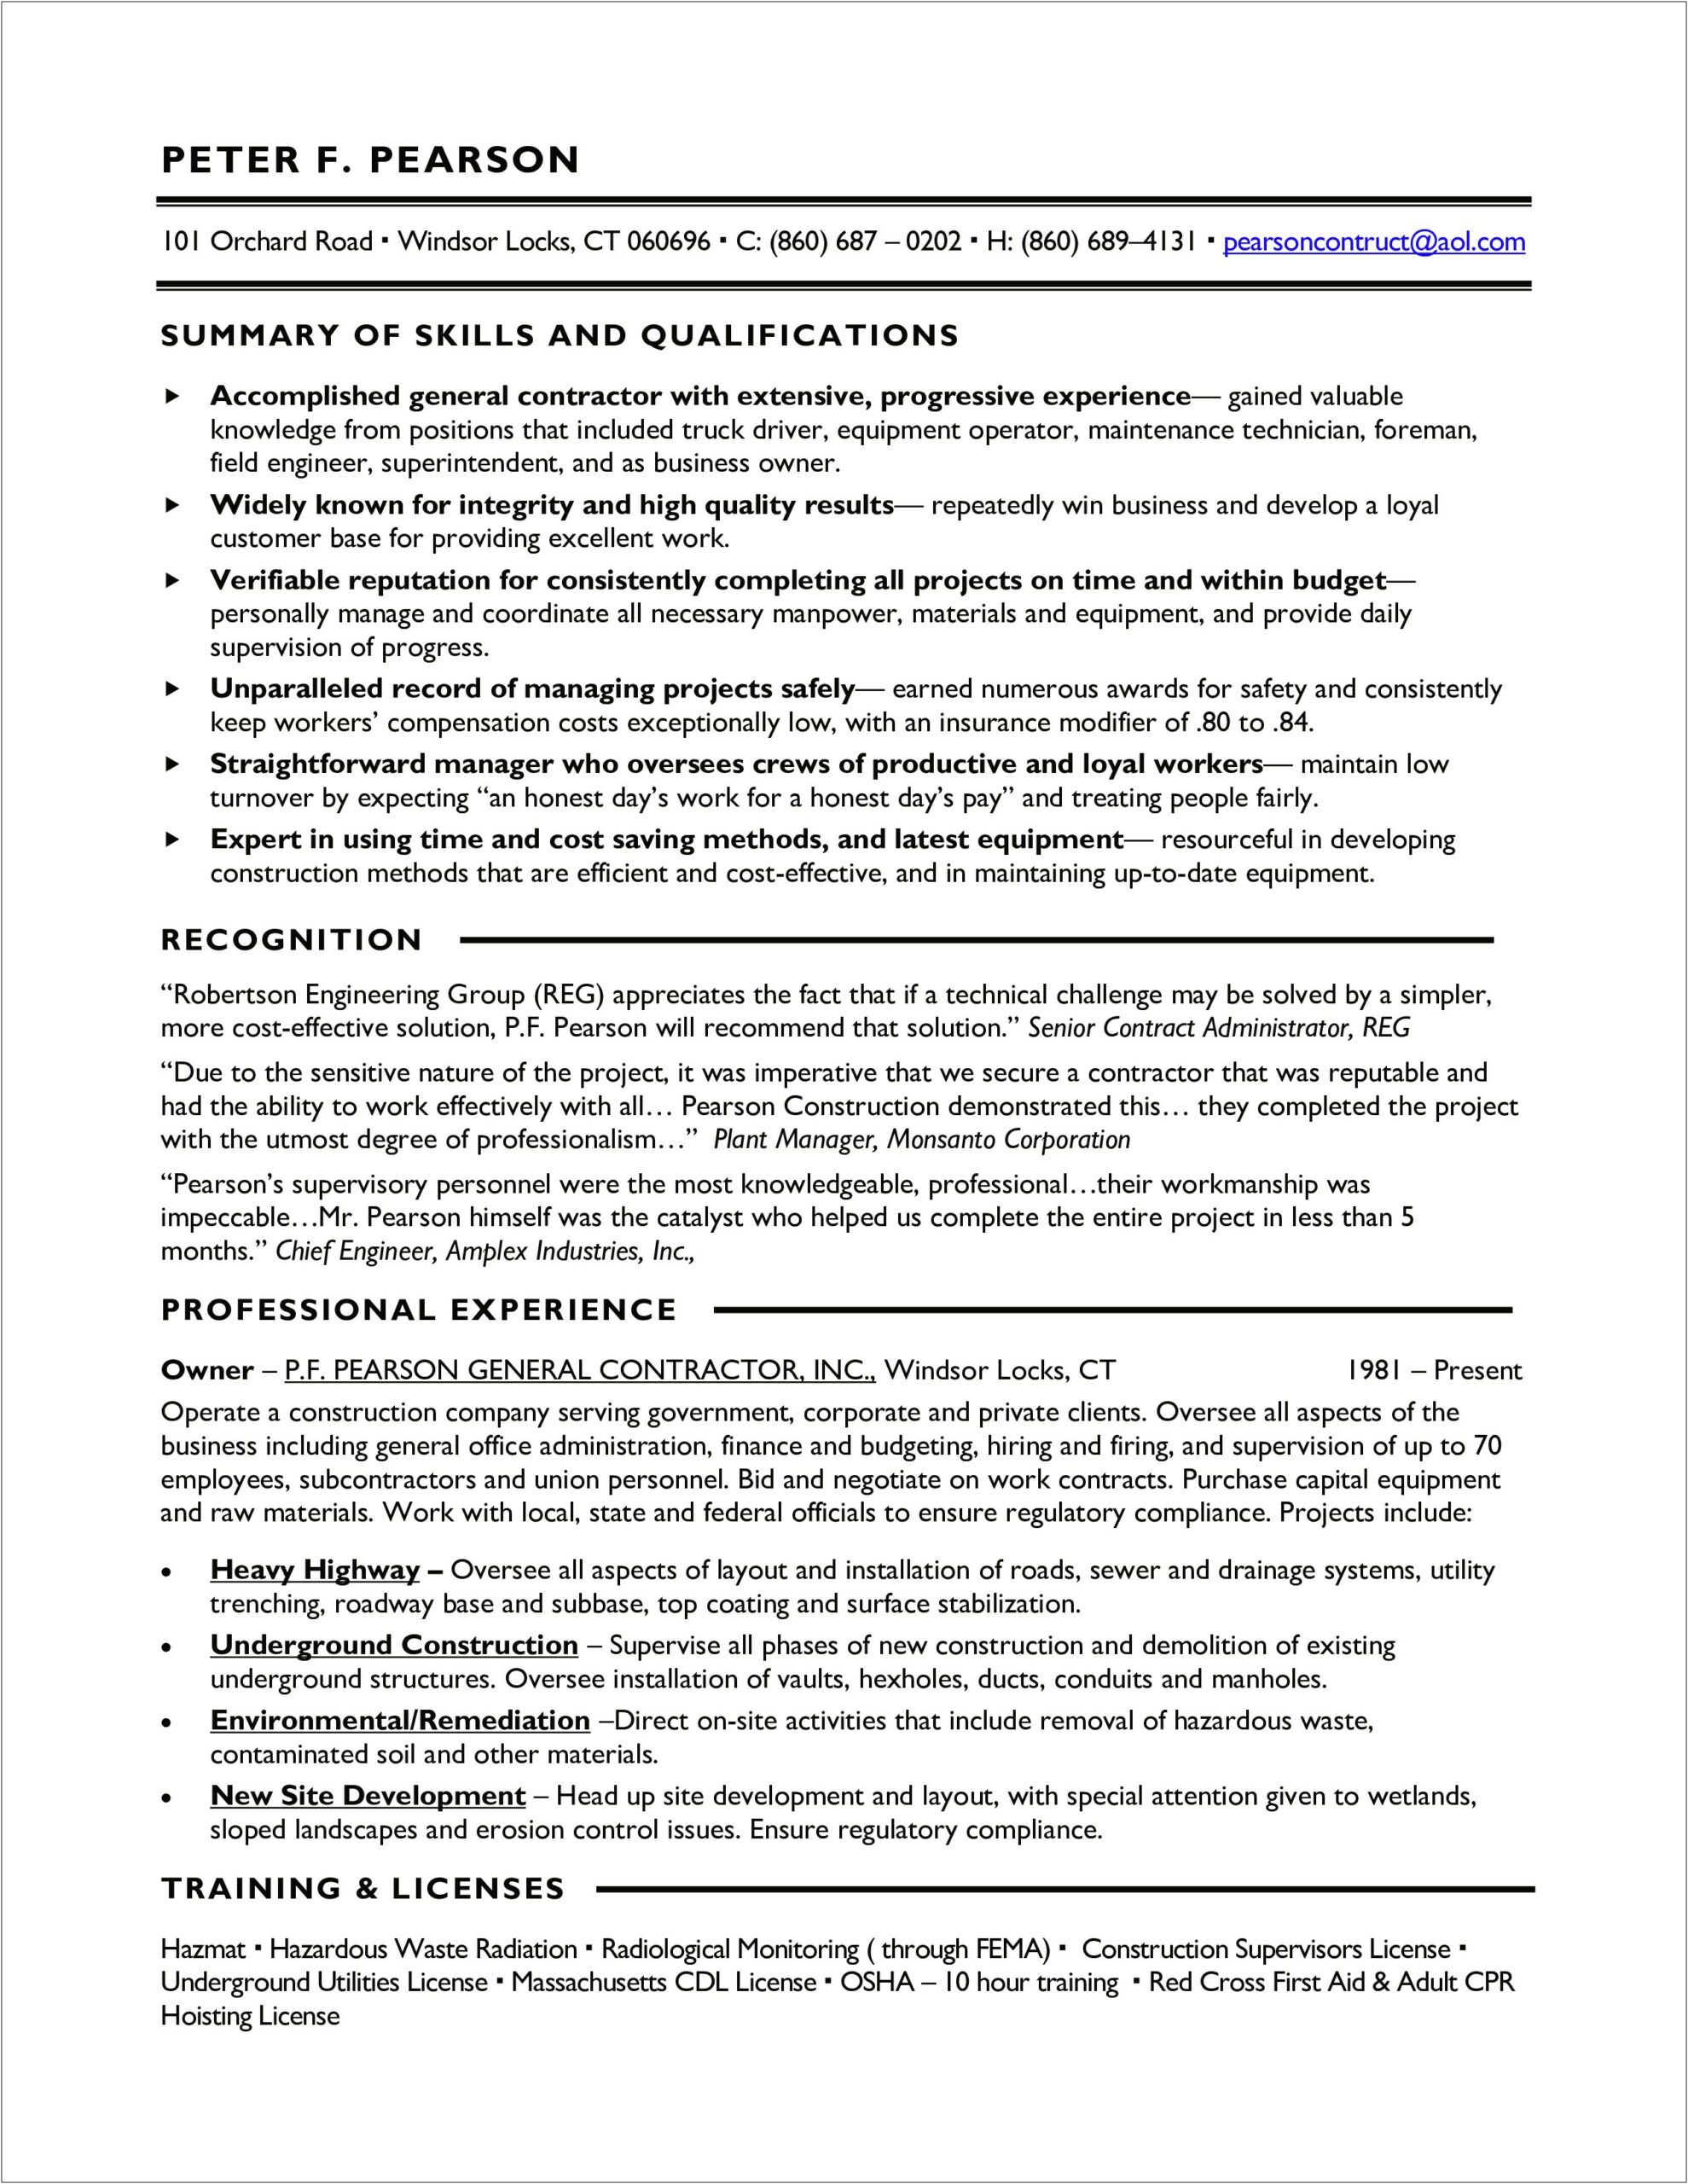 Sample Resume For New To Working